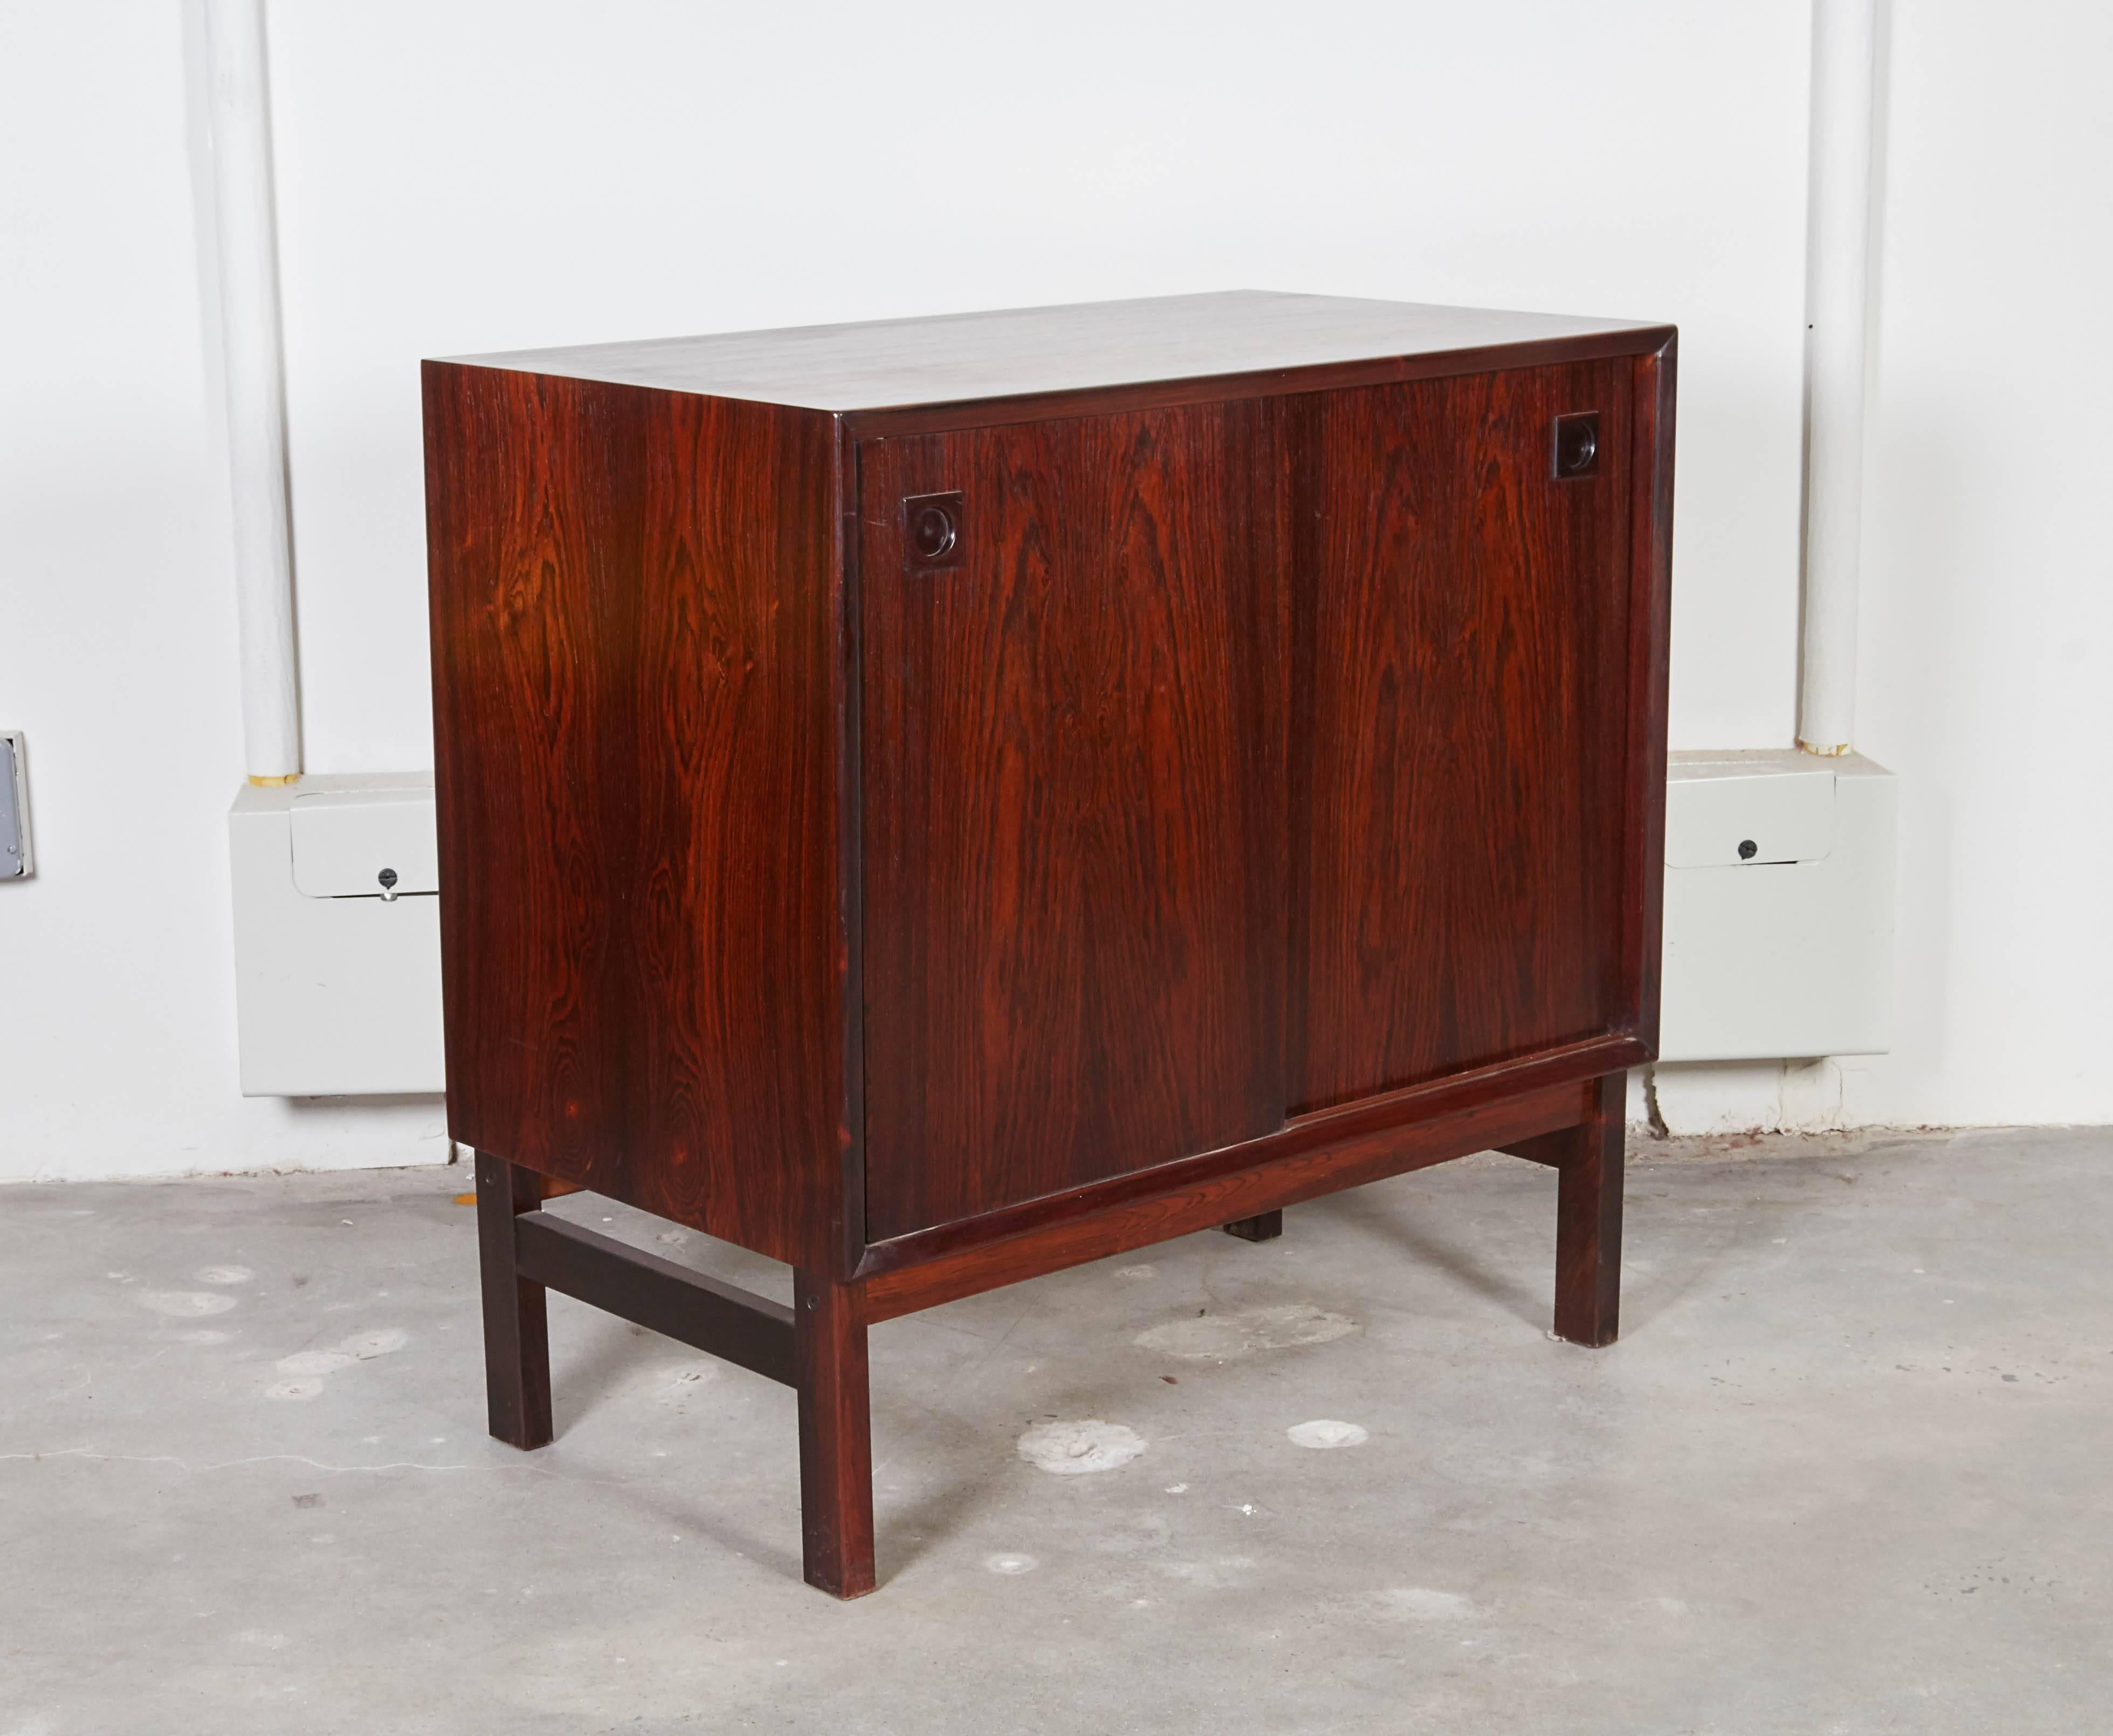 Vintage 1960s Modular Rosewood Sideboard Cabinet 

These Danish cabinets are in excellent condition. As a modular set there is no limited ideas on how to use these. Separate in different rooms, as large night stands or for media storage. Ready for